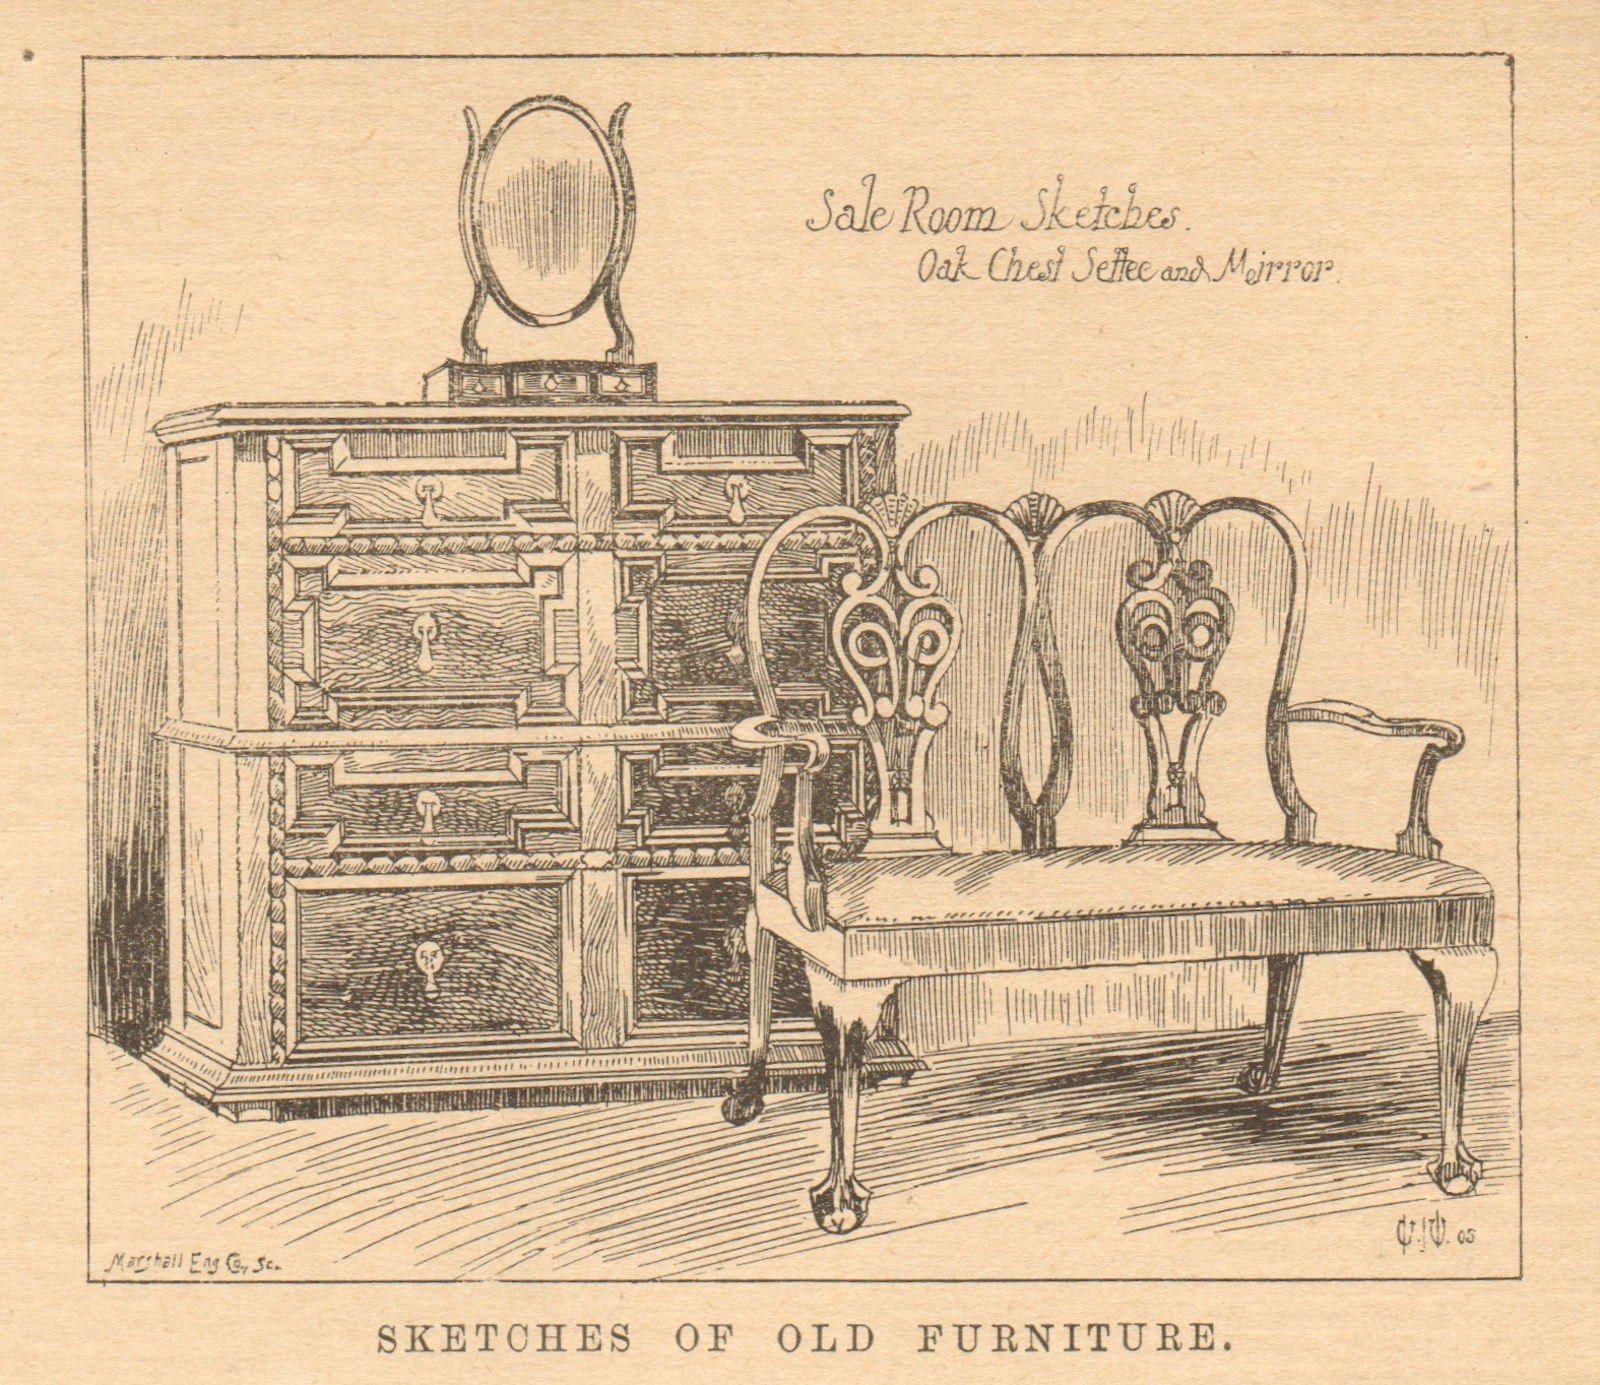 Sketches of old furniture. Sale room sketches. oak chest & mirror 1905 print